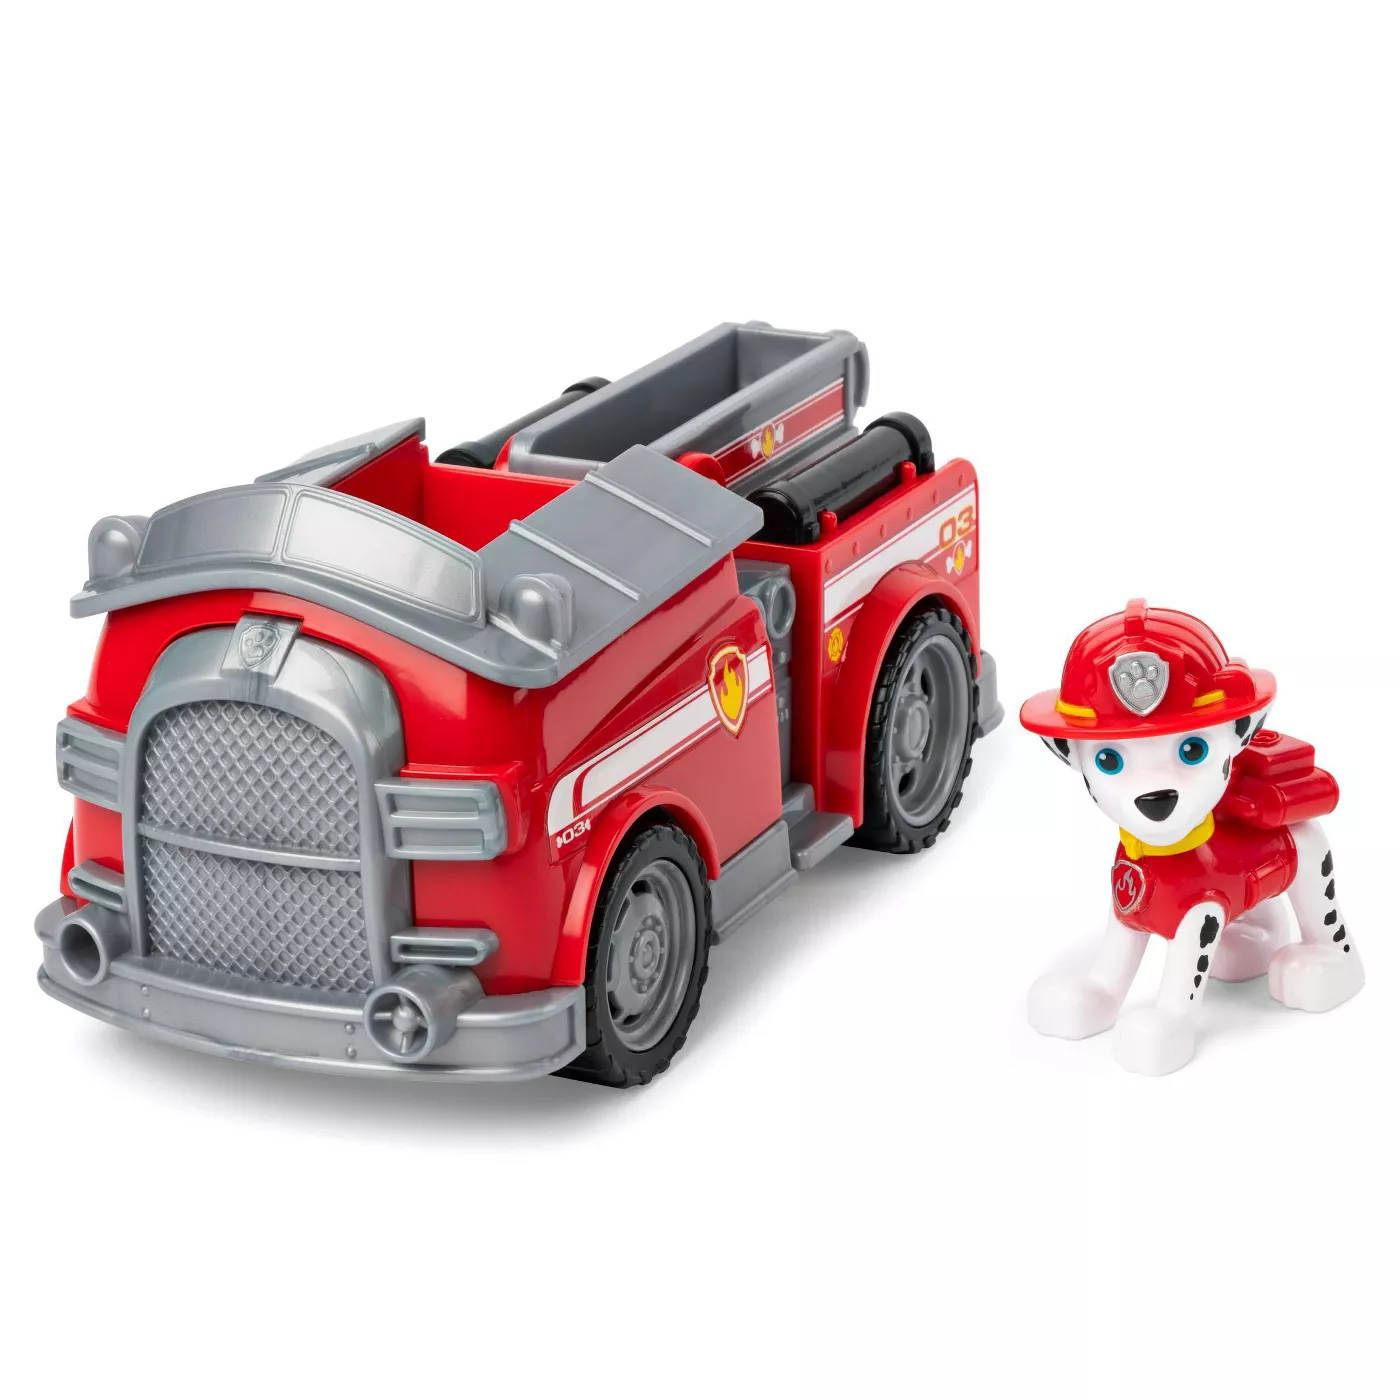 PAW Patrol Fire Engine Vehicle with Marshall - image 1 of 4